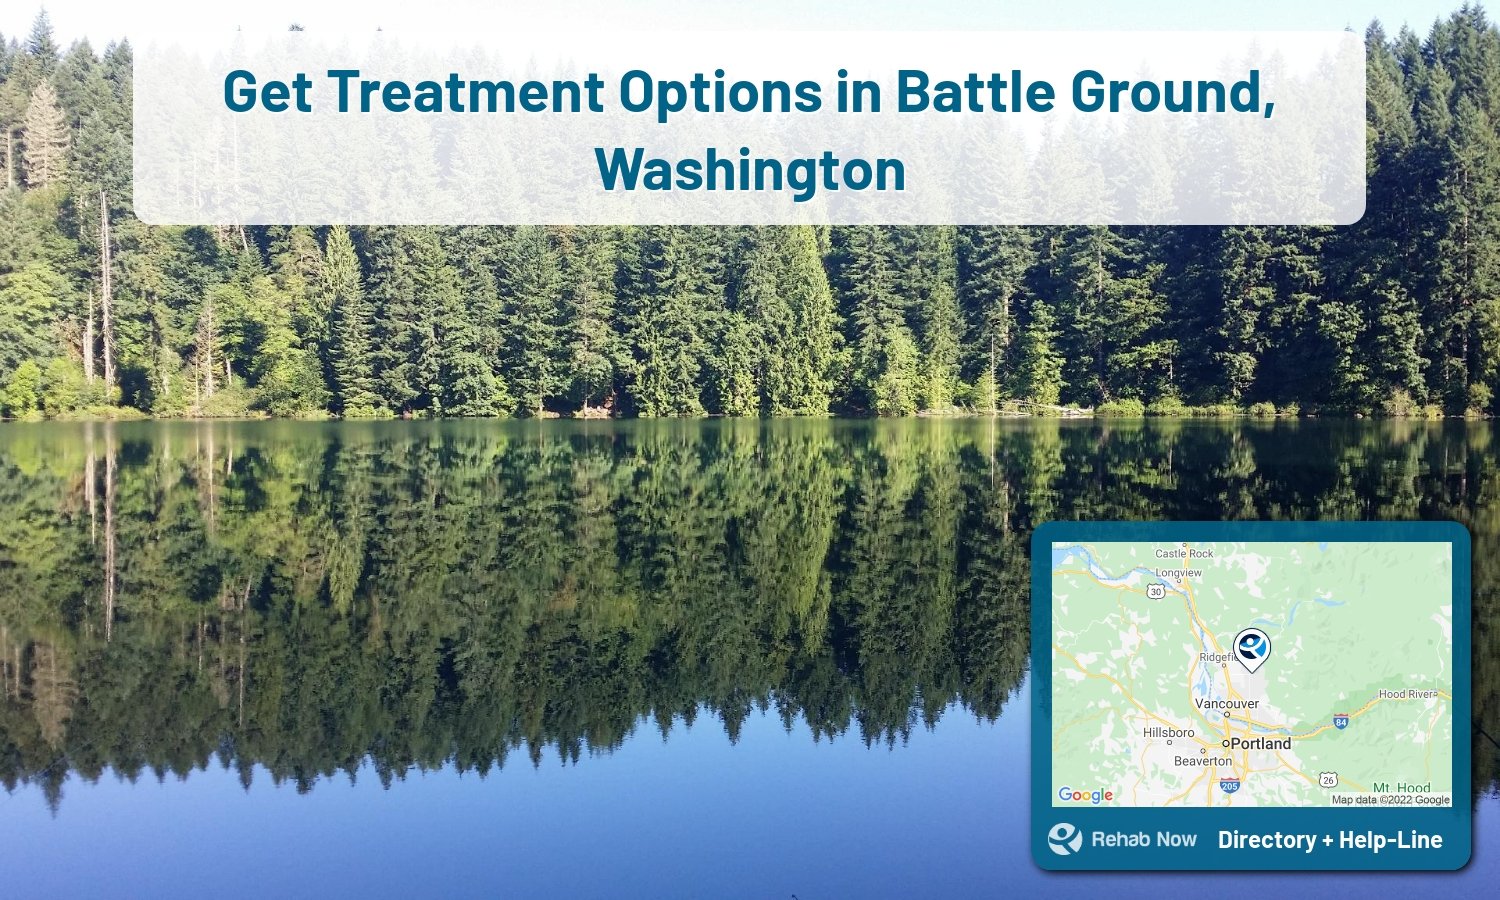 Our experts can help you find treatment now in Battle Ground, Washington. We list drug rehab and alcohol centers in Washington.